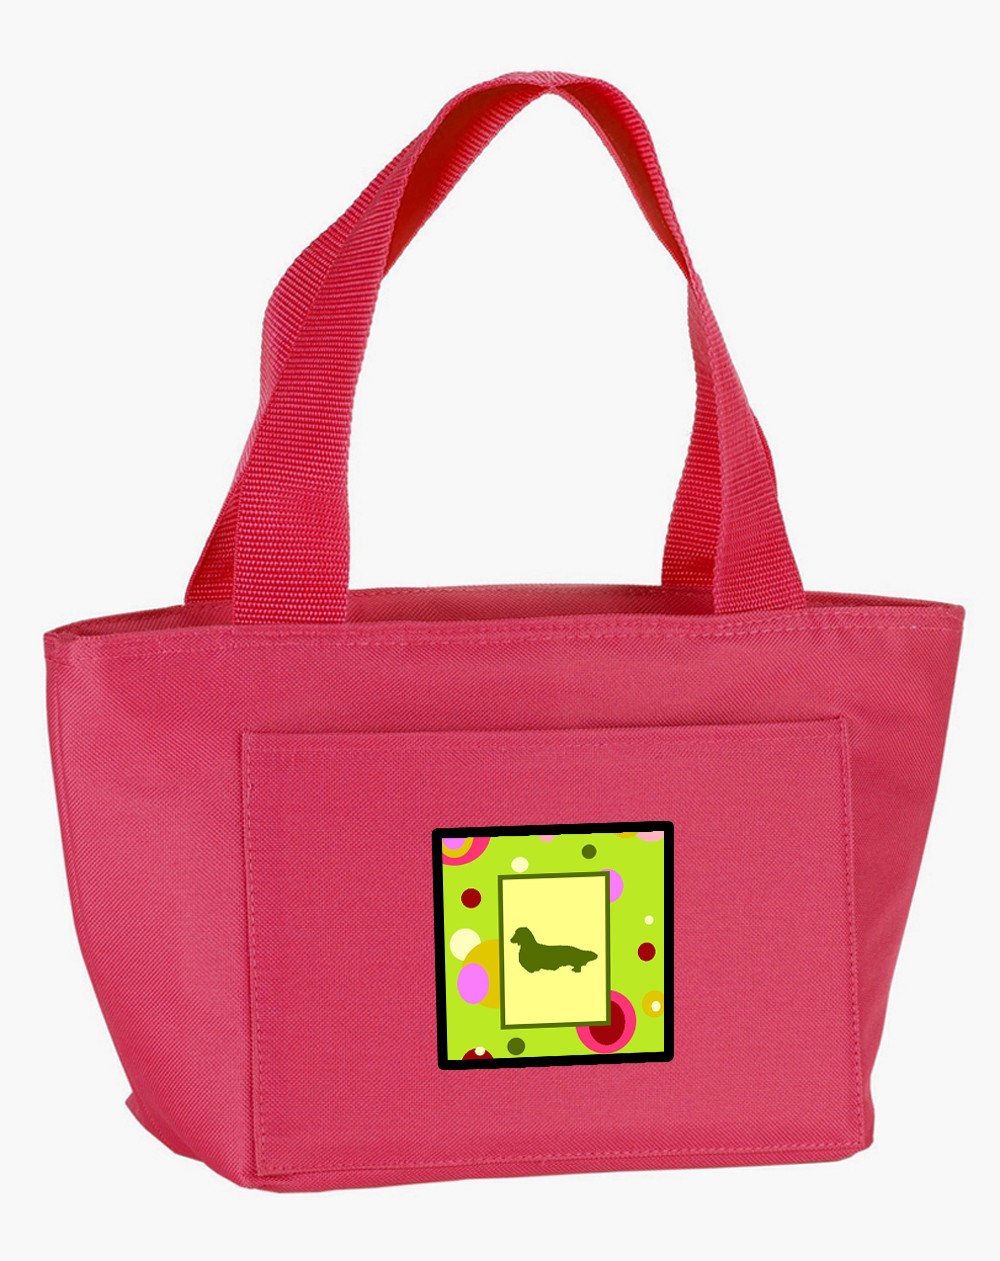 Lime Green Dots Dachshund Lunch Bag CK1132PK-8808 by Caroline's Treasures